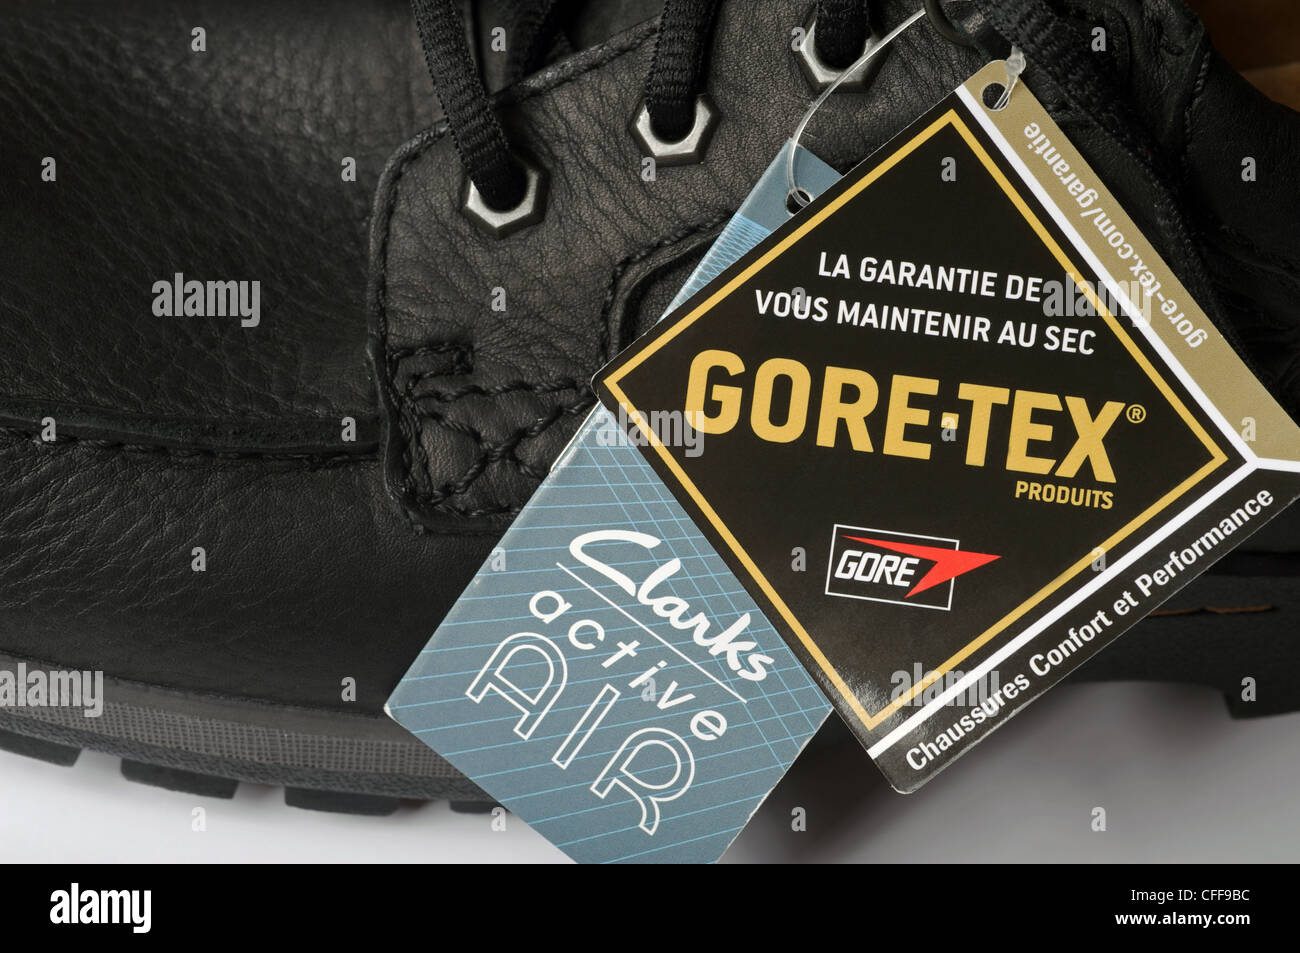 clarks active air gore tex shoes